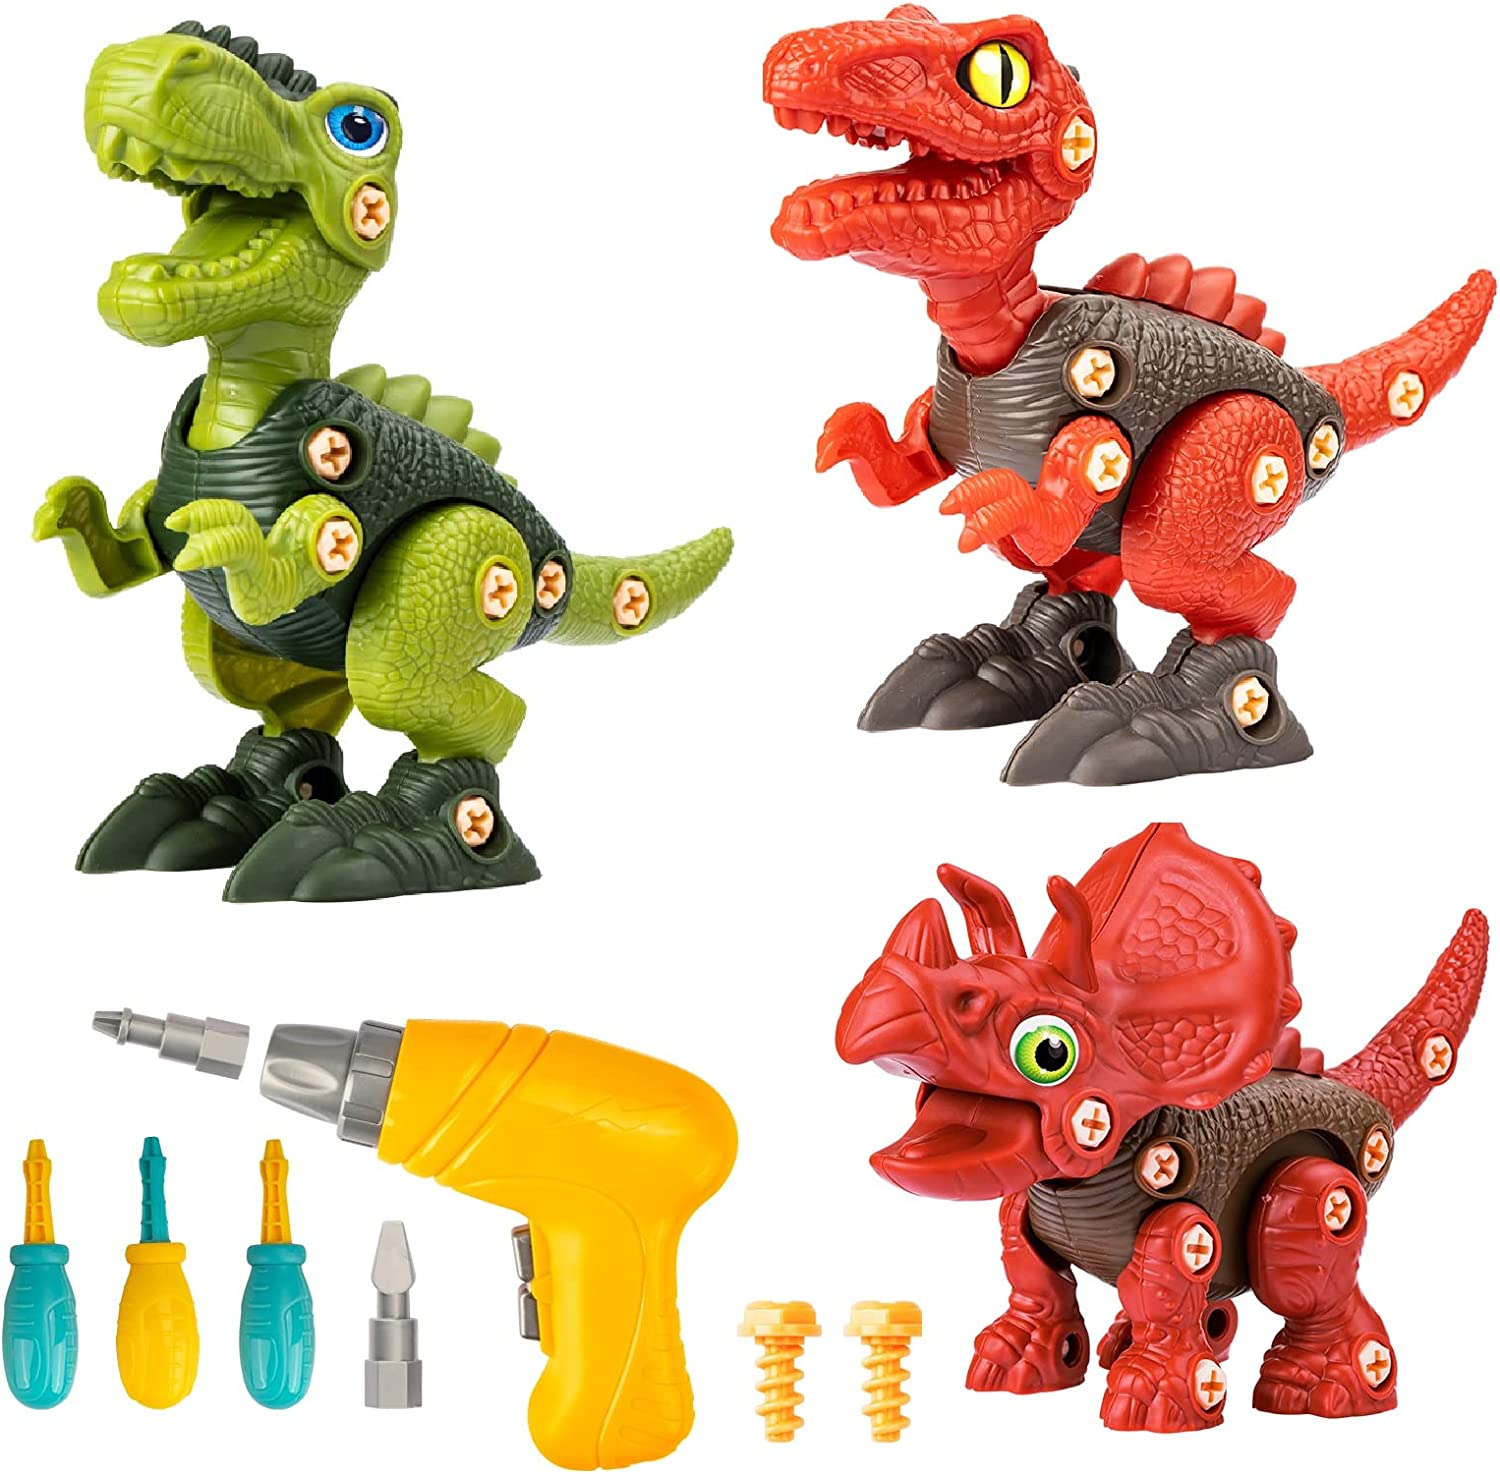 Construction Building Dinosaur Toys - Not sold in stores